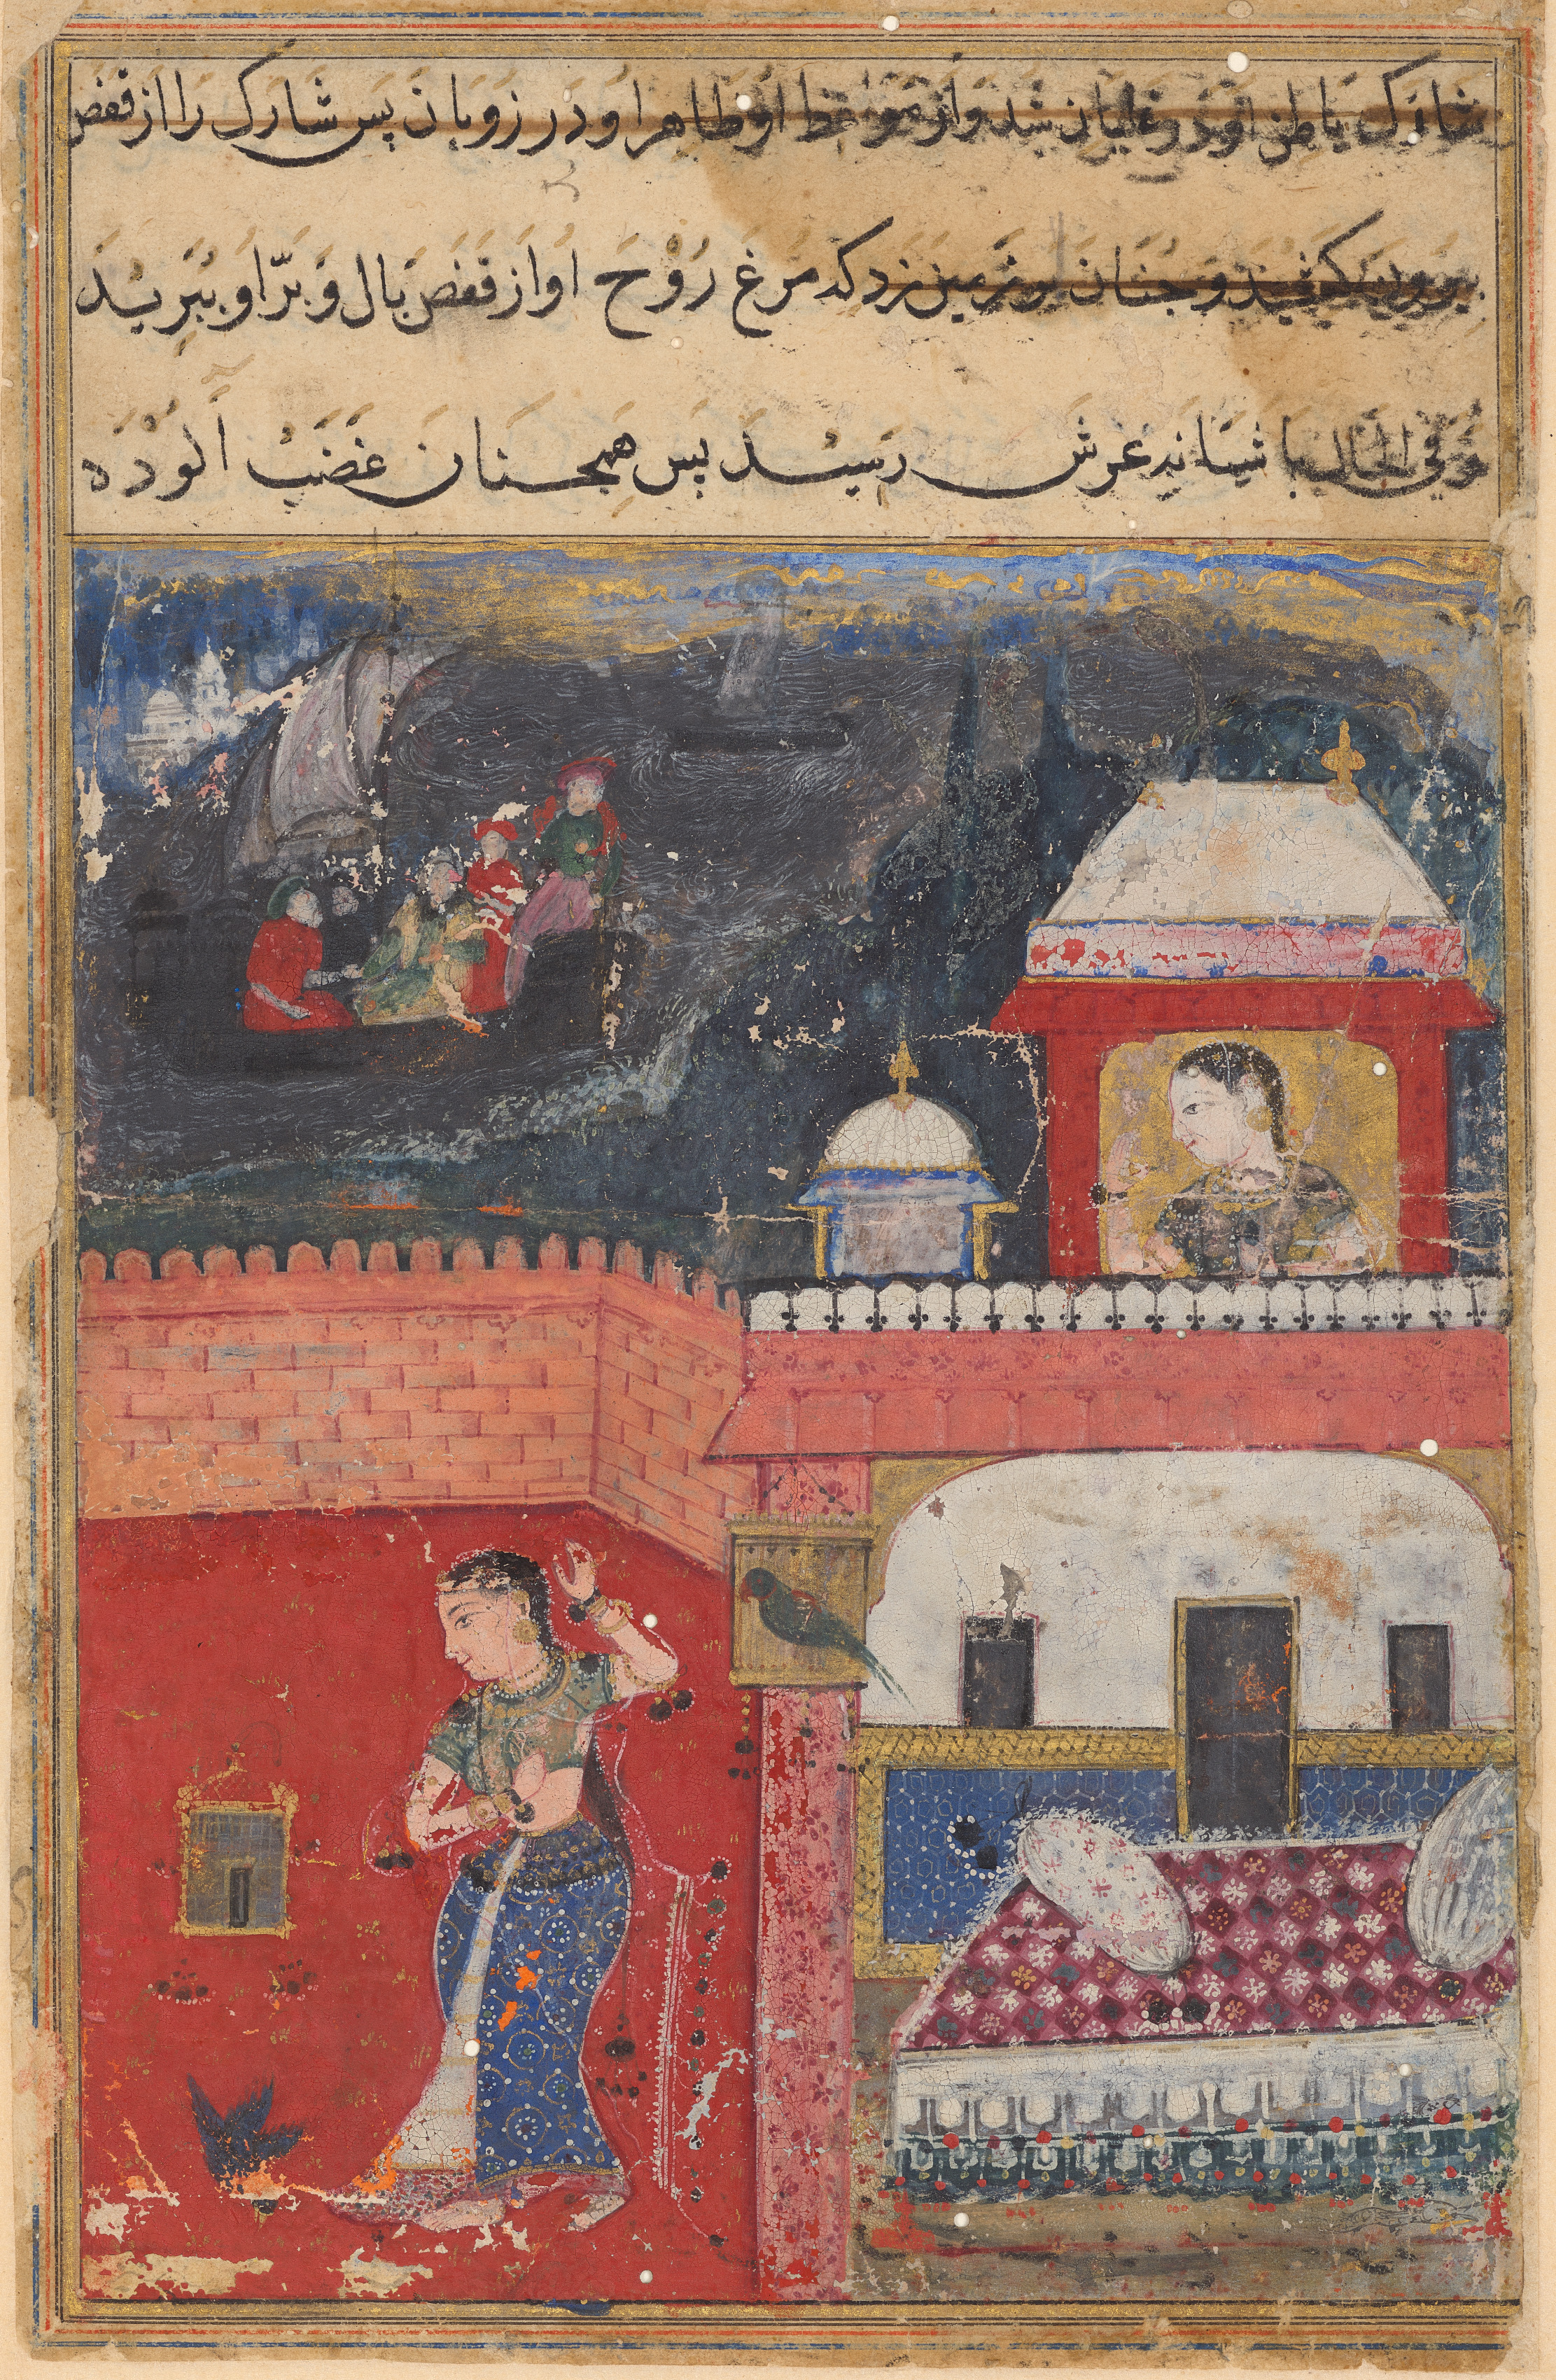 Khujasta kills the pet mynah who advises her not to be unfaithful to Maymun, her husband, from a Tuti-nama (Tales of the Parrot): First Night